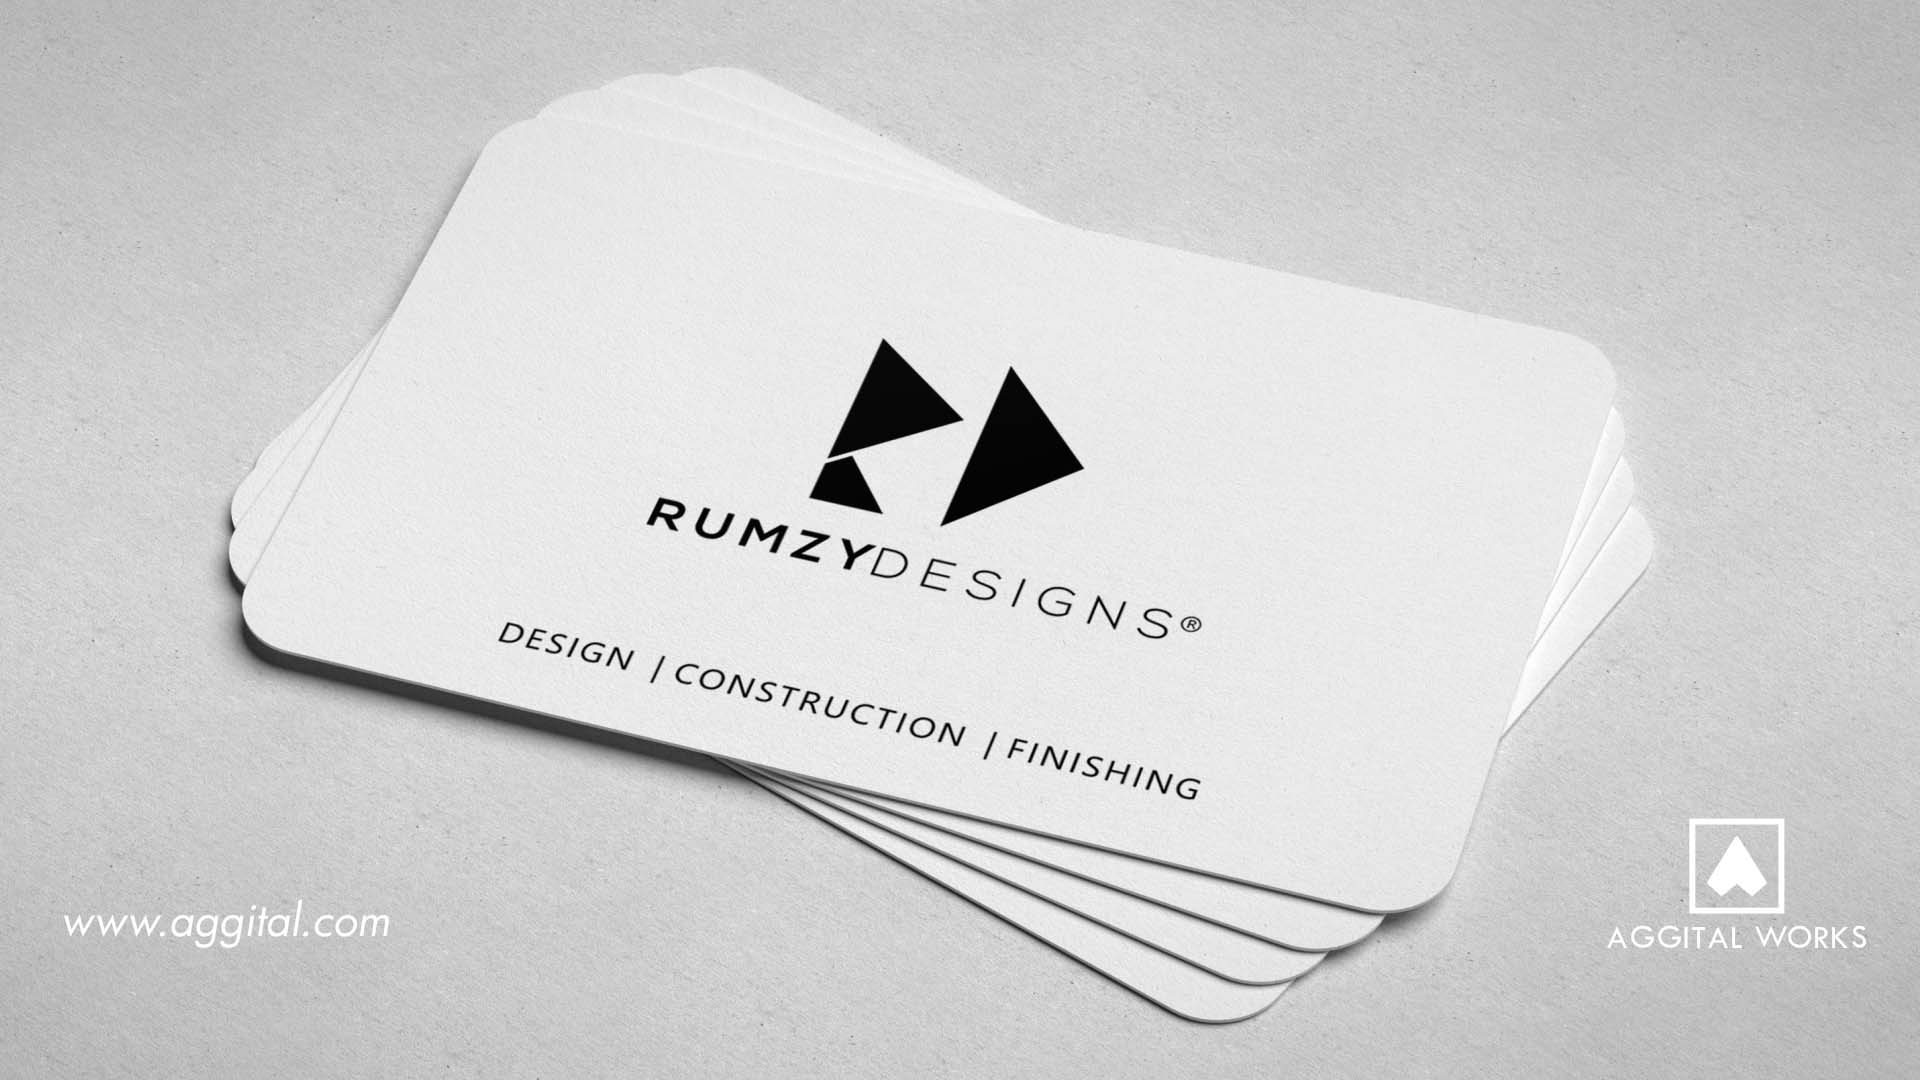 Rumzy Designs – Business Card for a Construction Company.